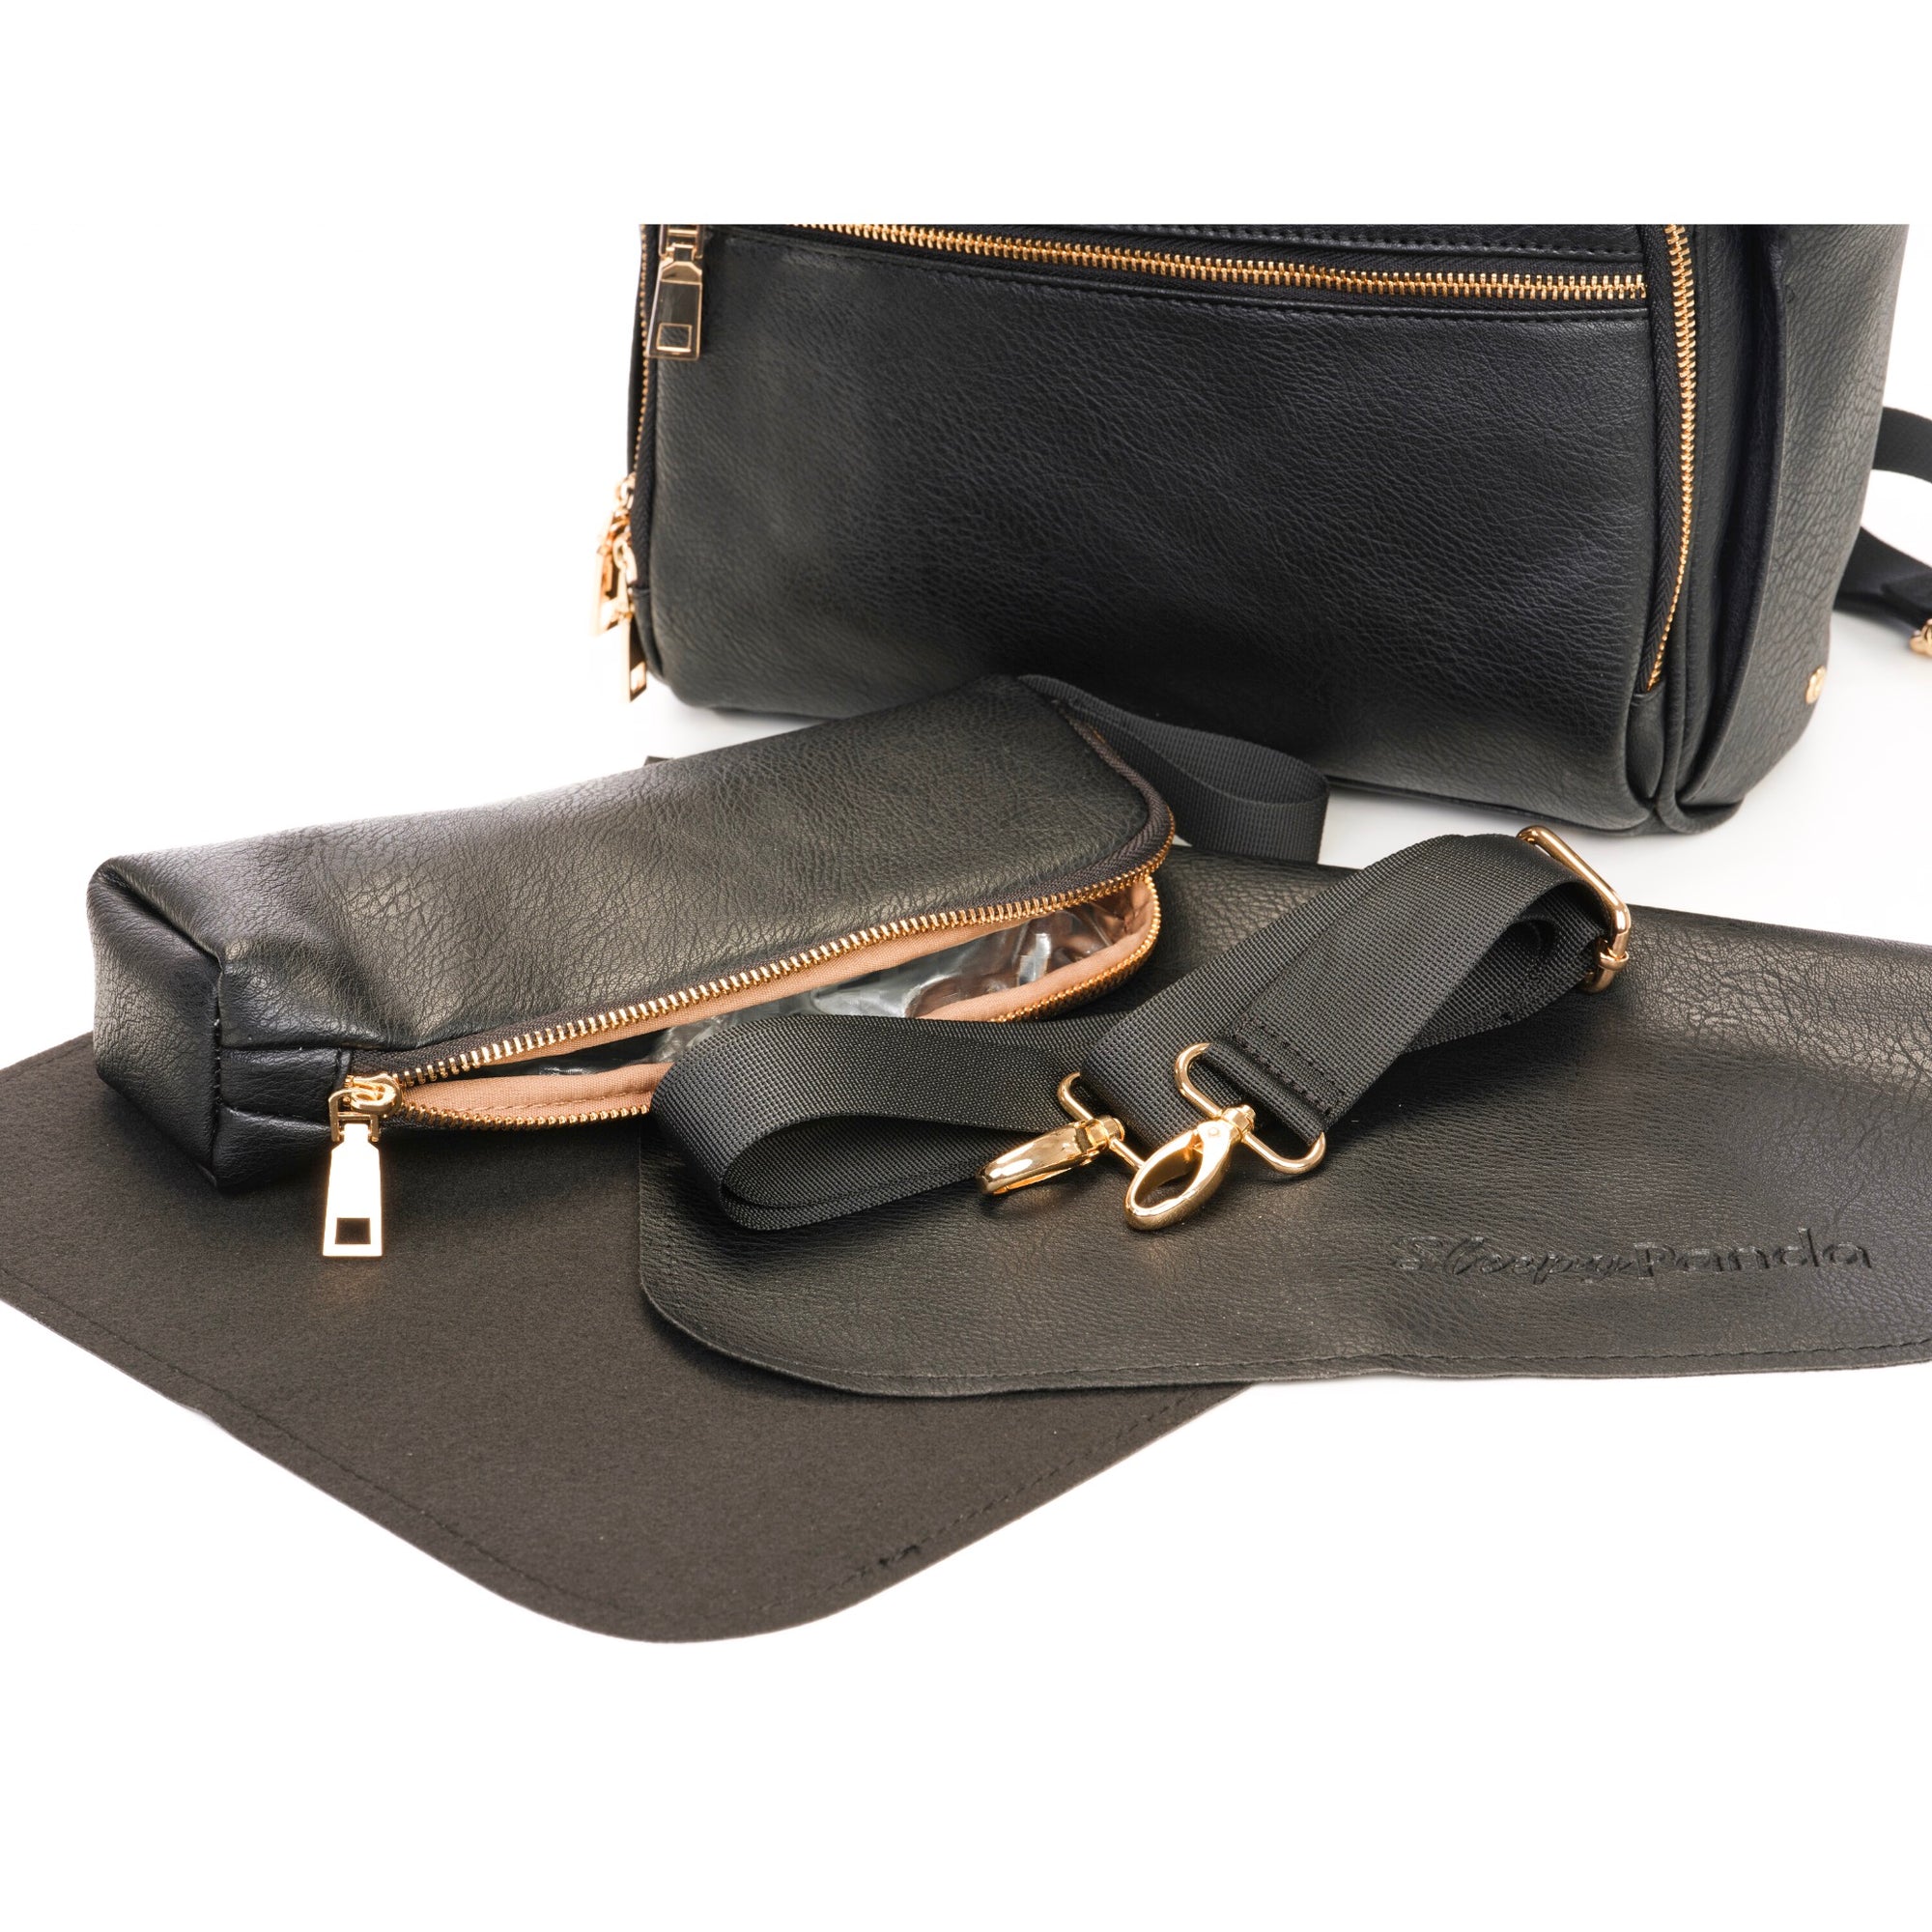 Limited Time: FREE Bailey Bag 4-Piece Accessory Pack Black (Valued at $80)